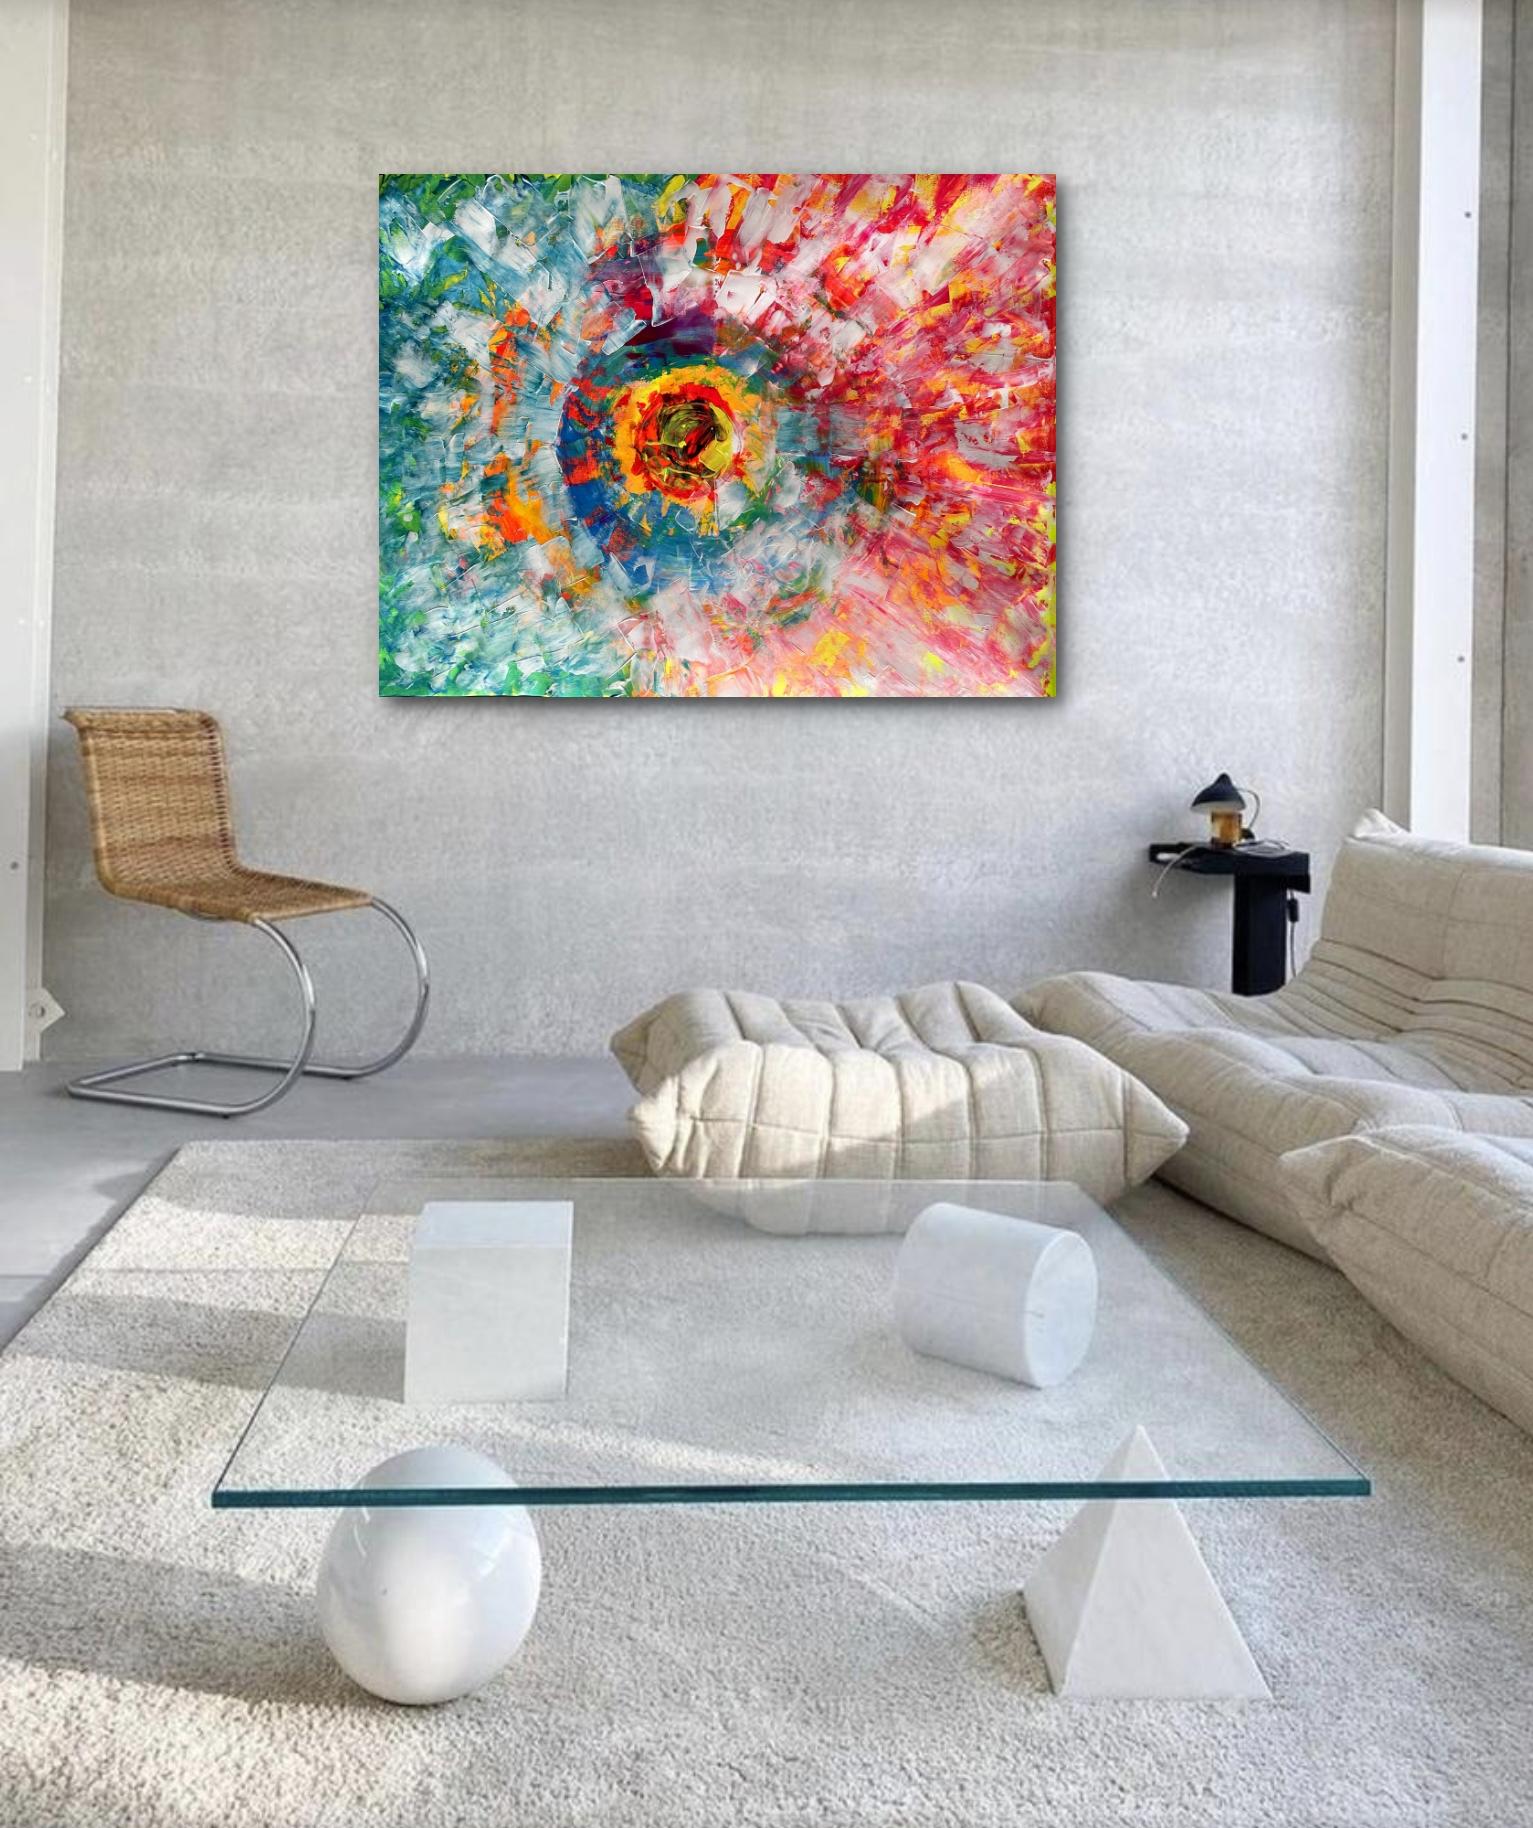 Hole Fantasy - Abstract Expressionist Painting by Juan Jose Garay